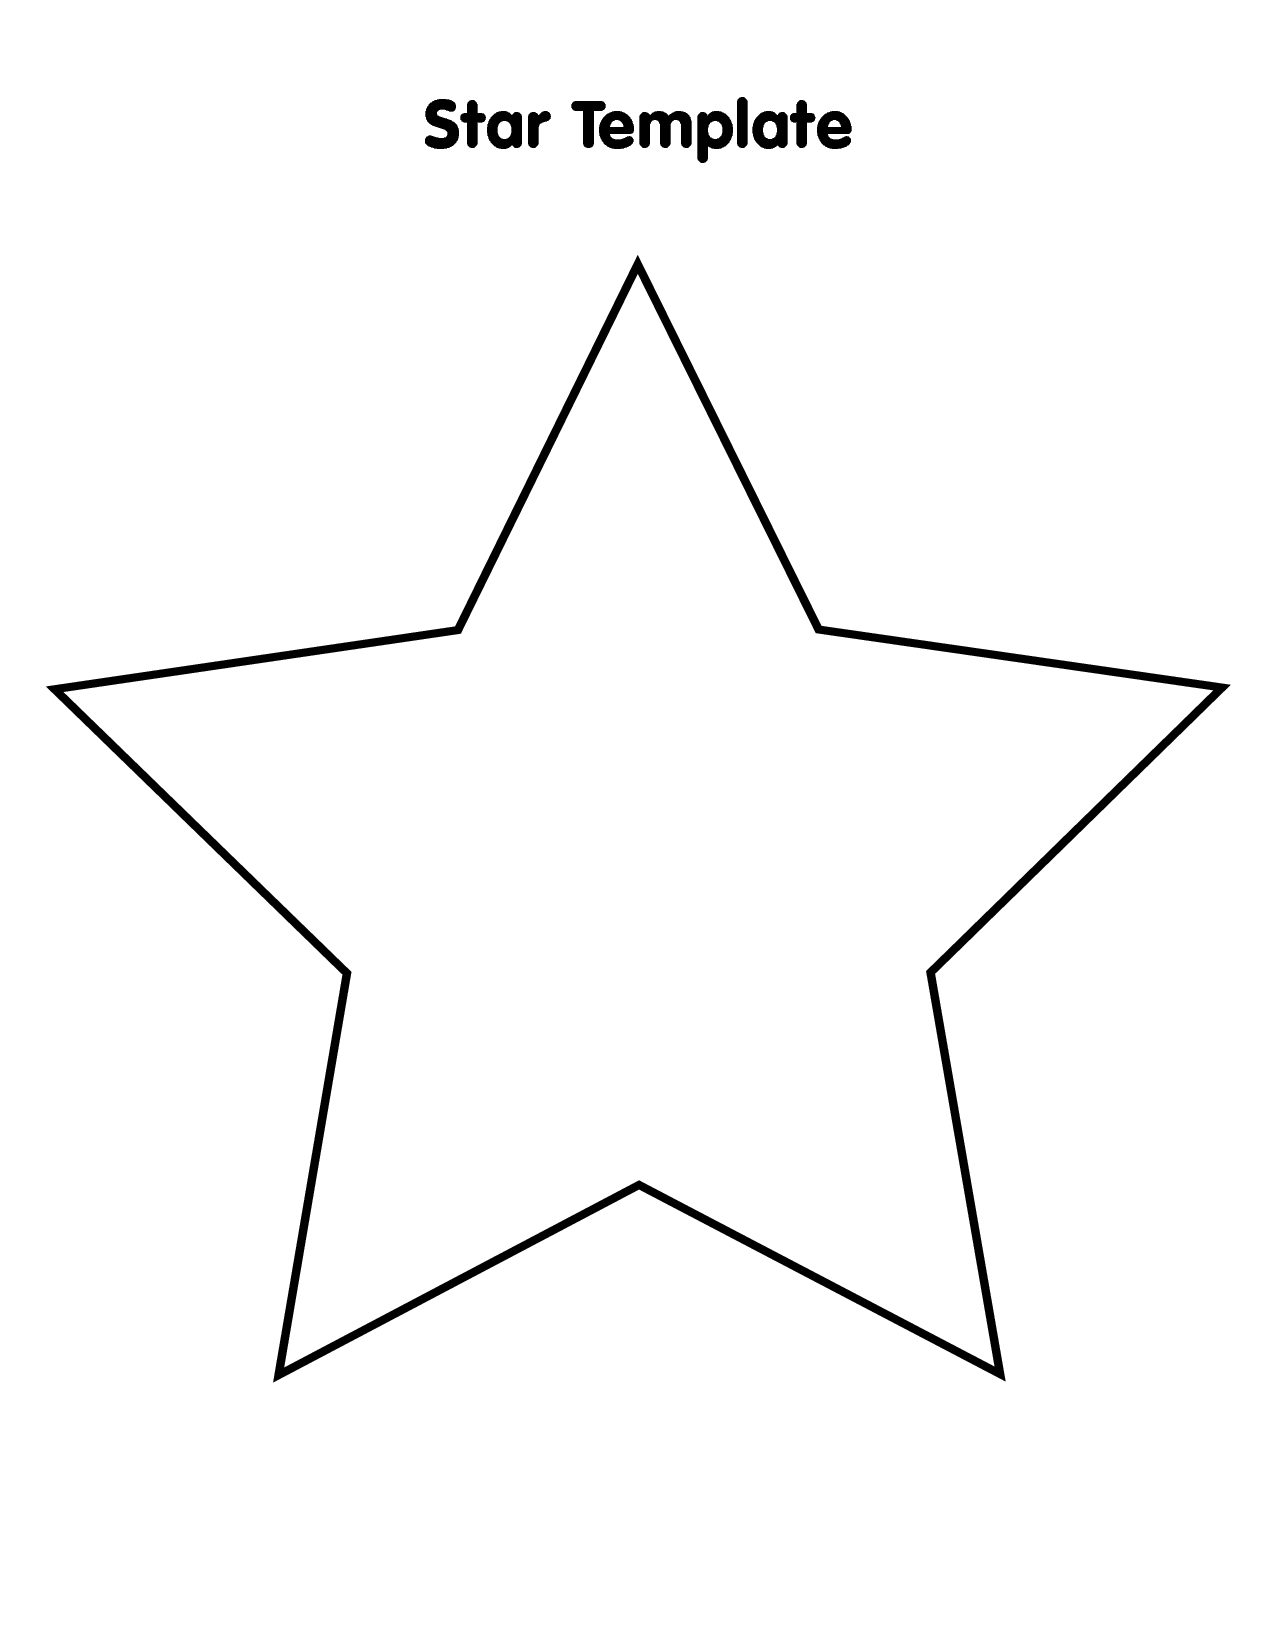 7-best-images-of-free-printable-star-templates-large-star-template